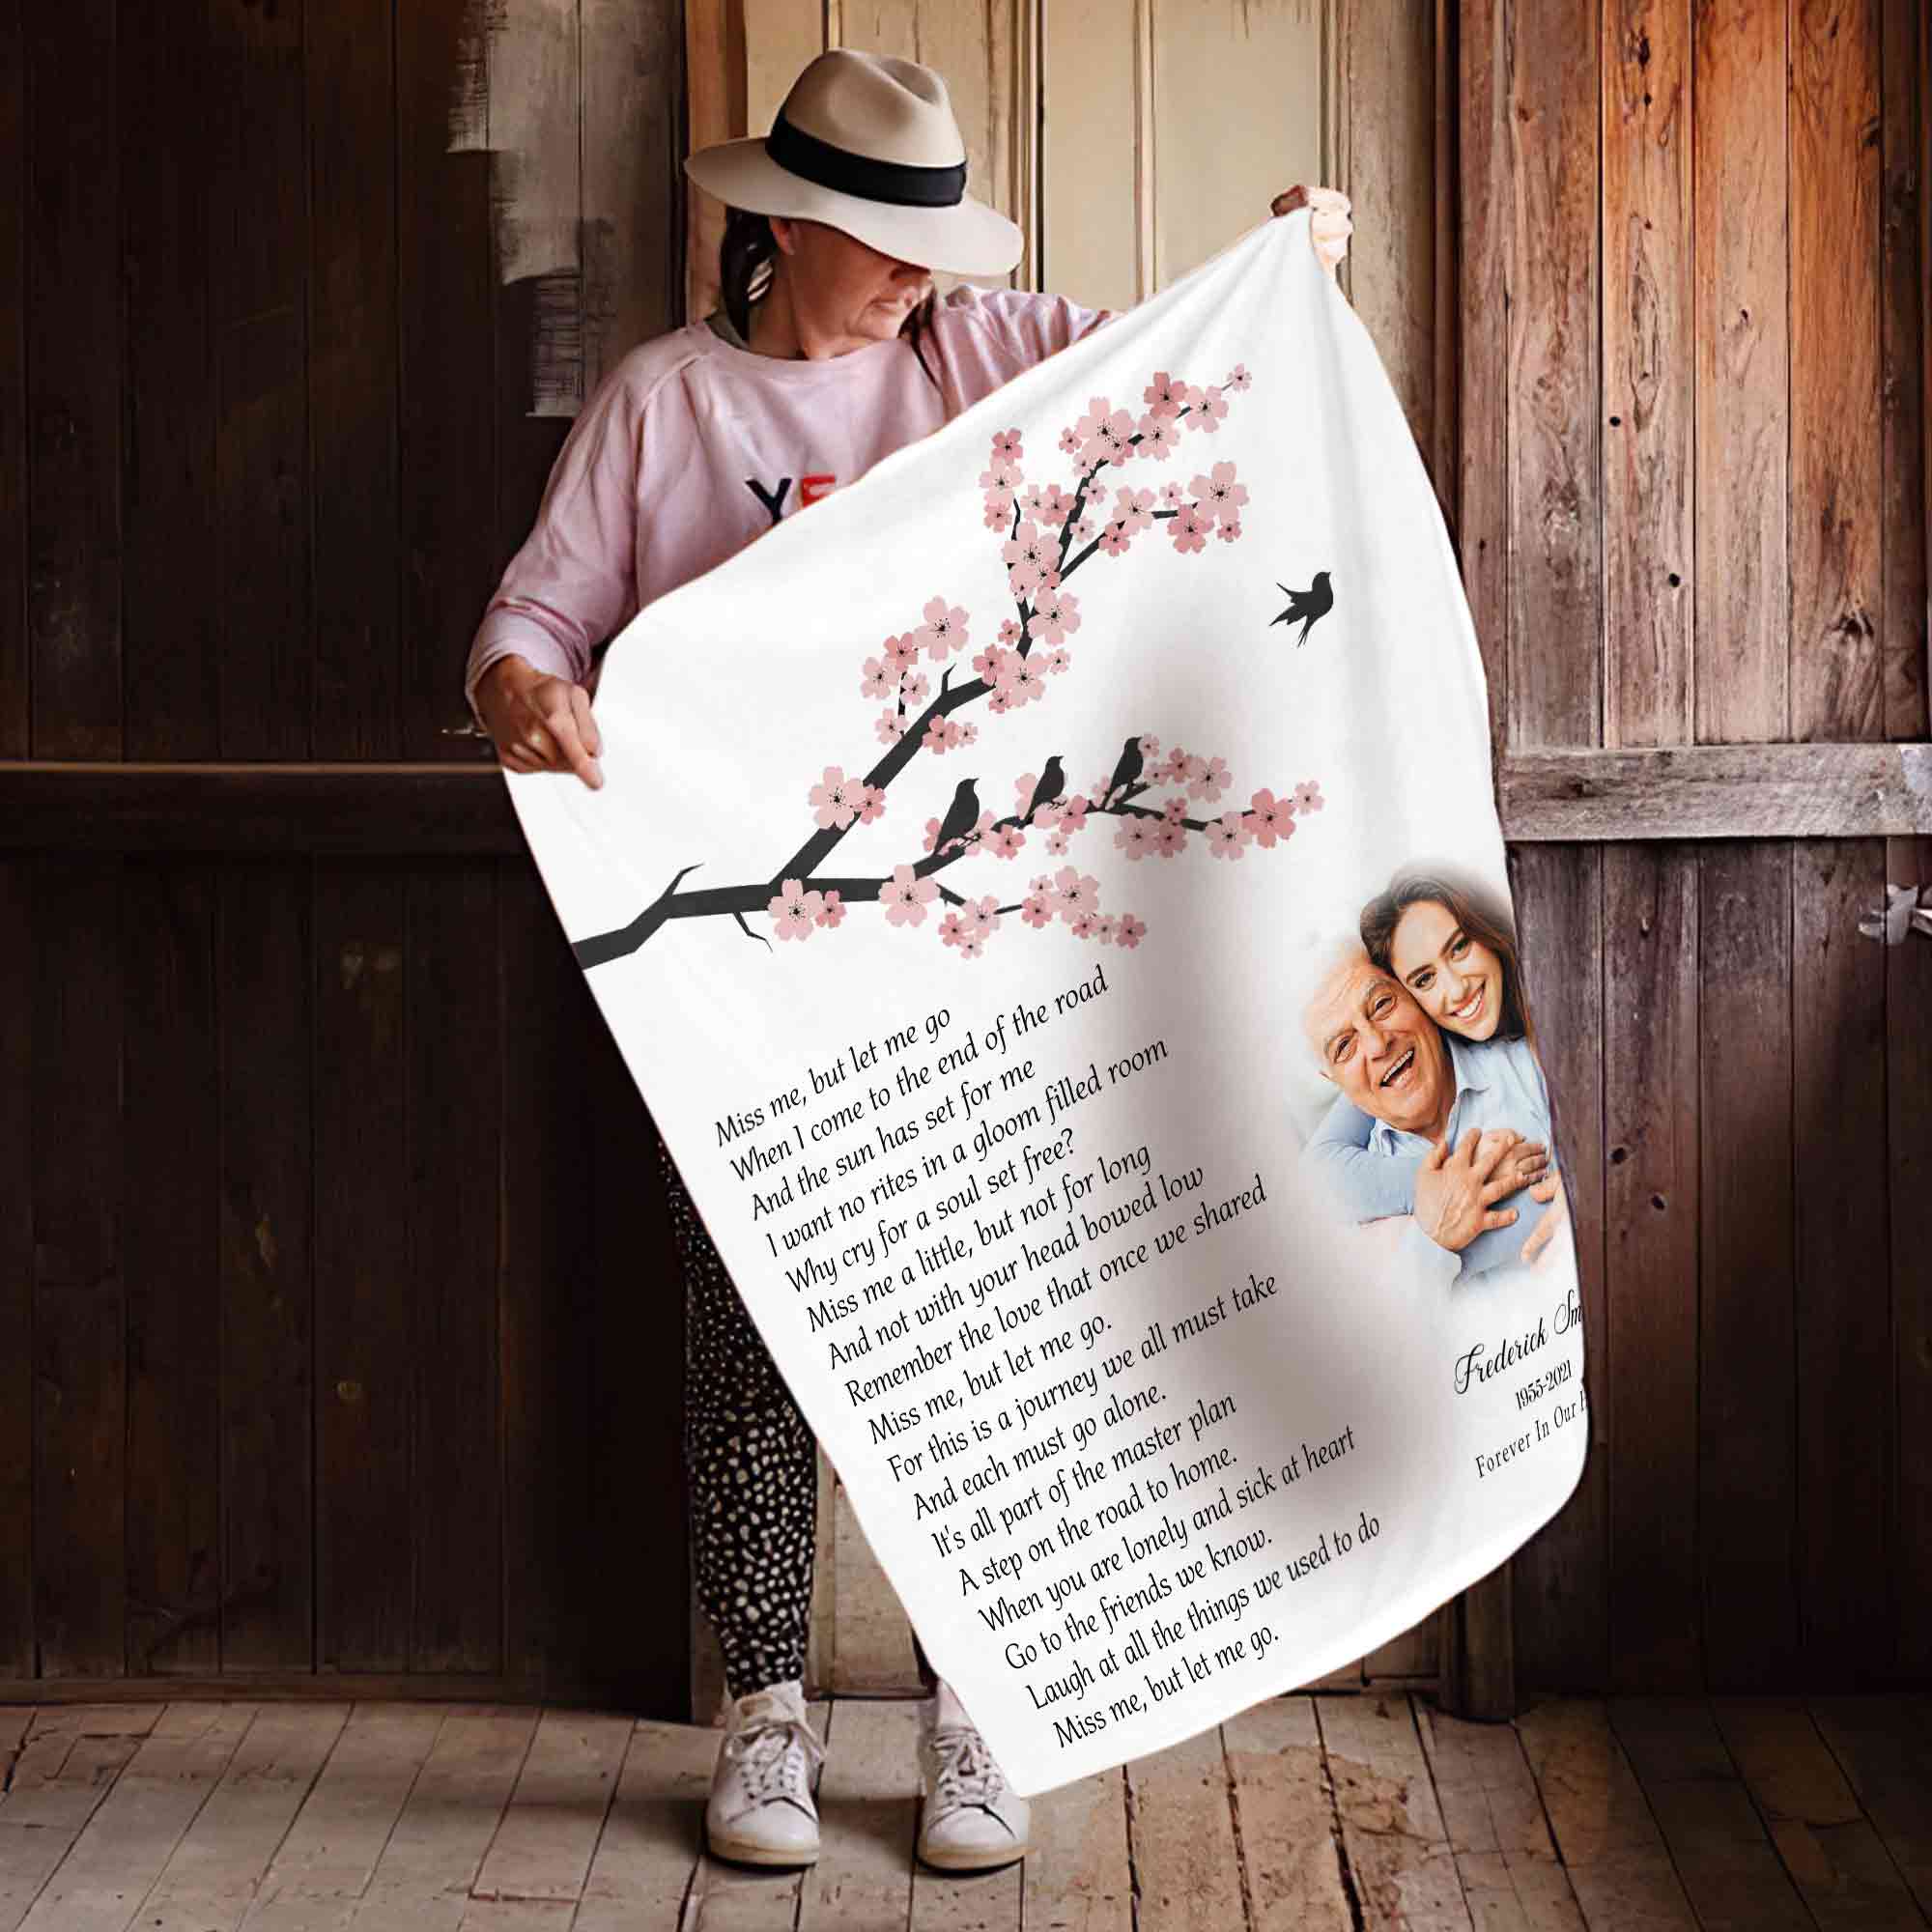 Personalized Memorial Blankets, In Memory Blanket For Loss Of Father, Bereavement Poem